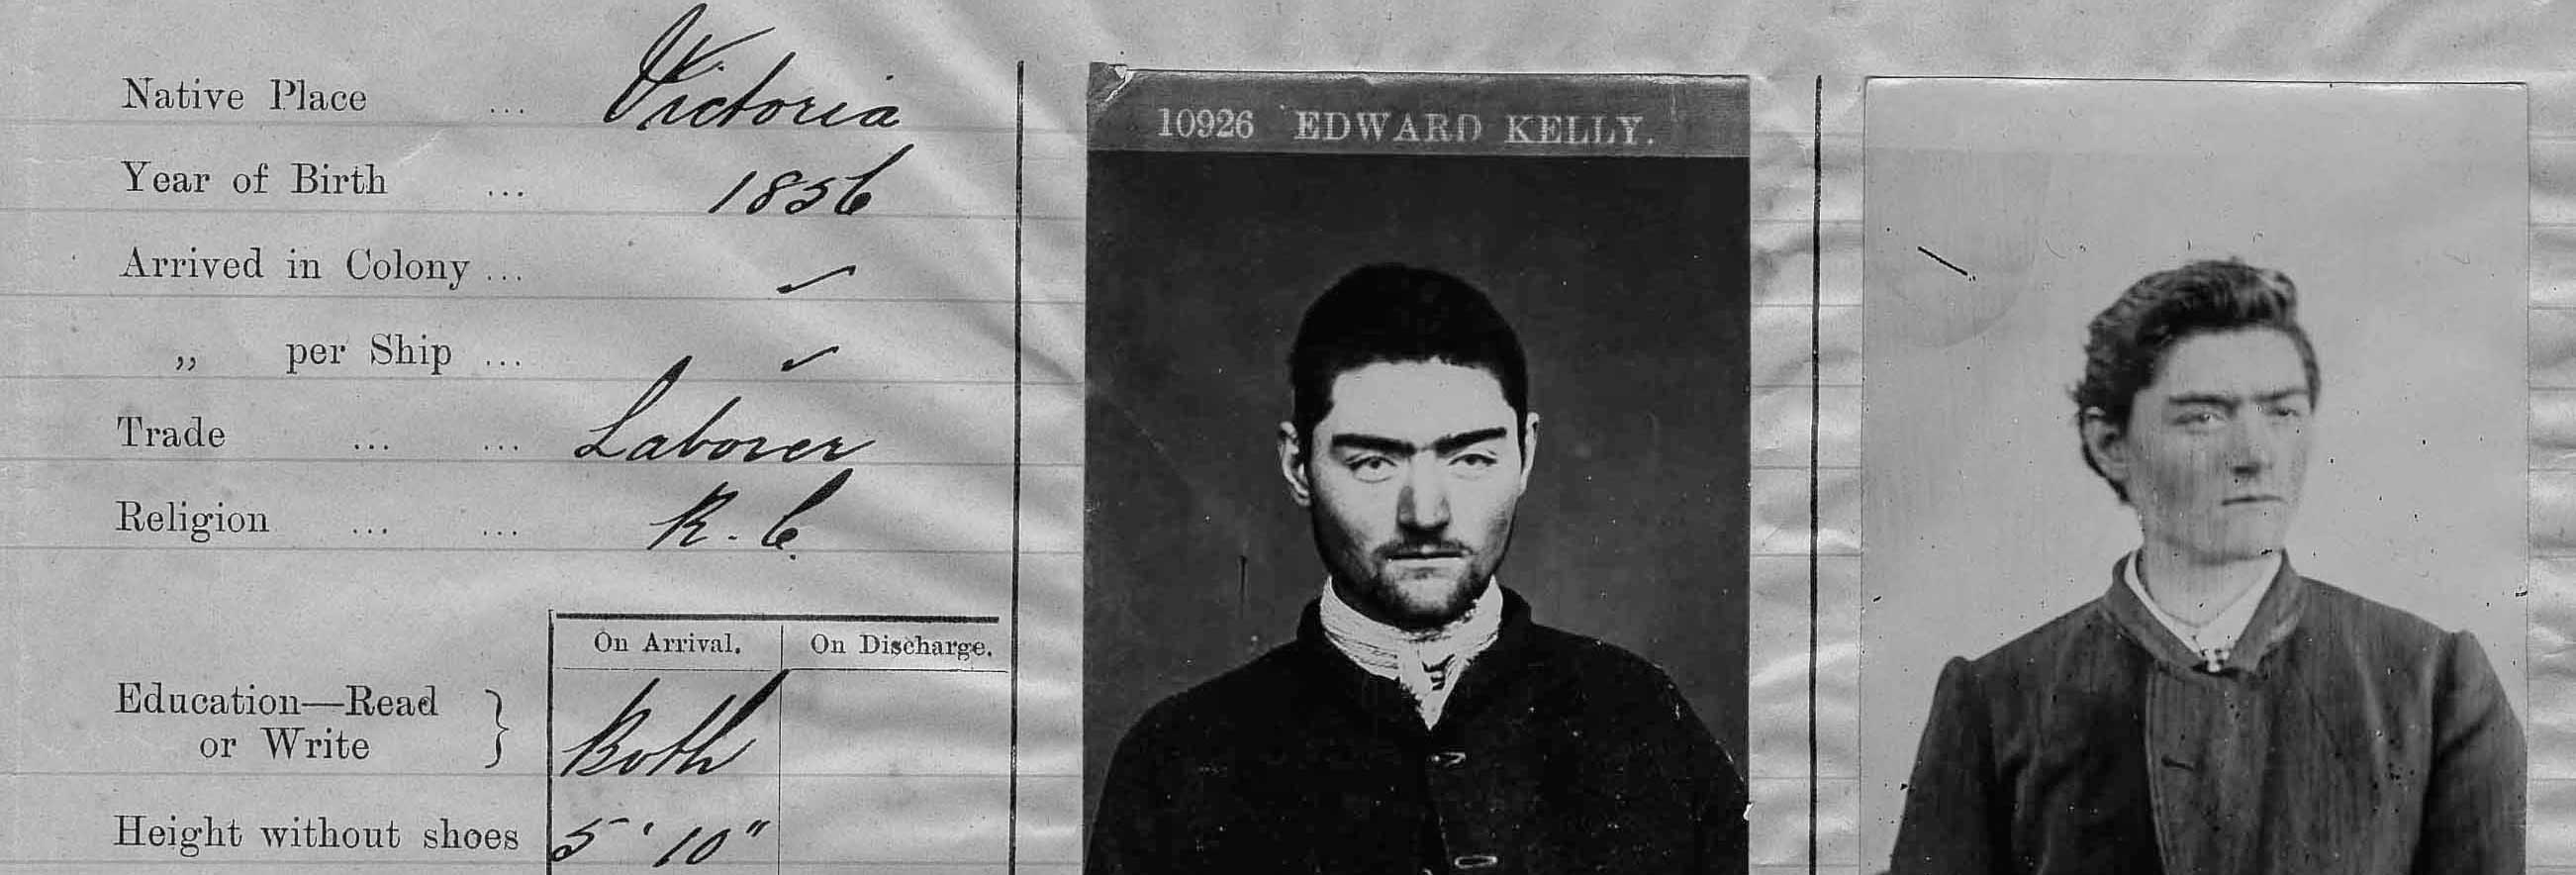 Ned Kelly historical record 